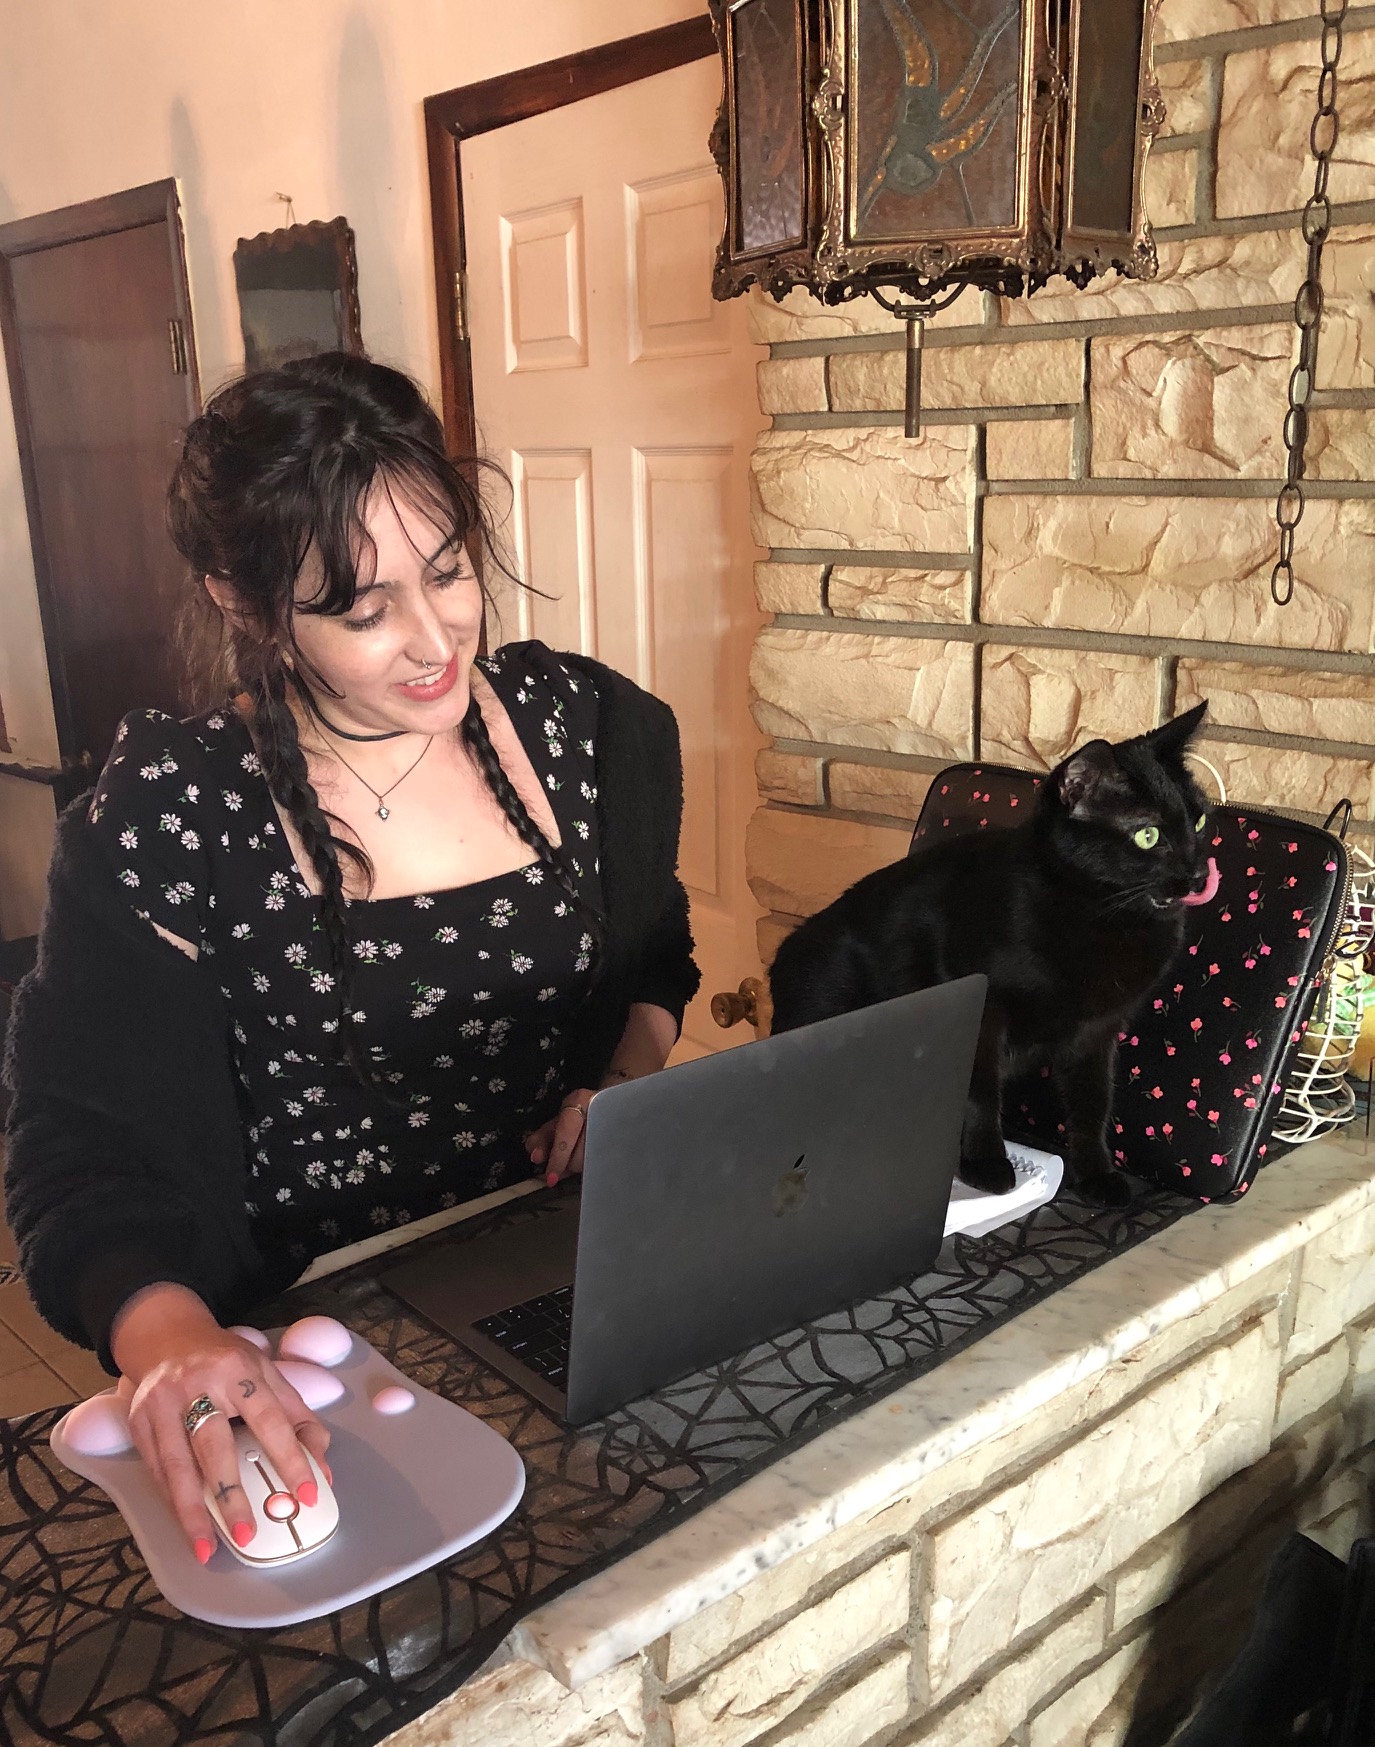 A woman sits at her laptop while a cat watches